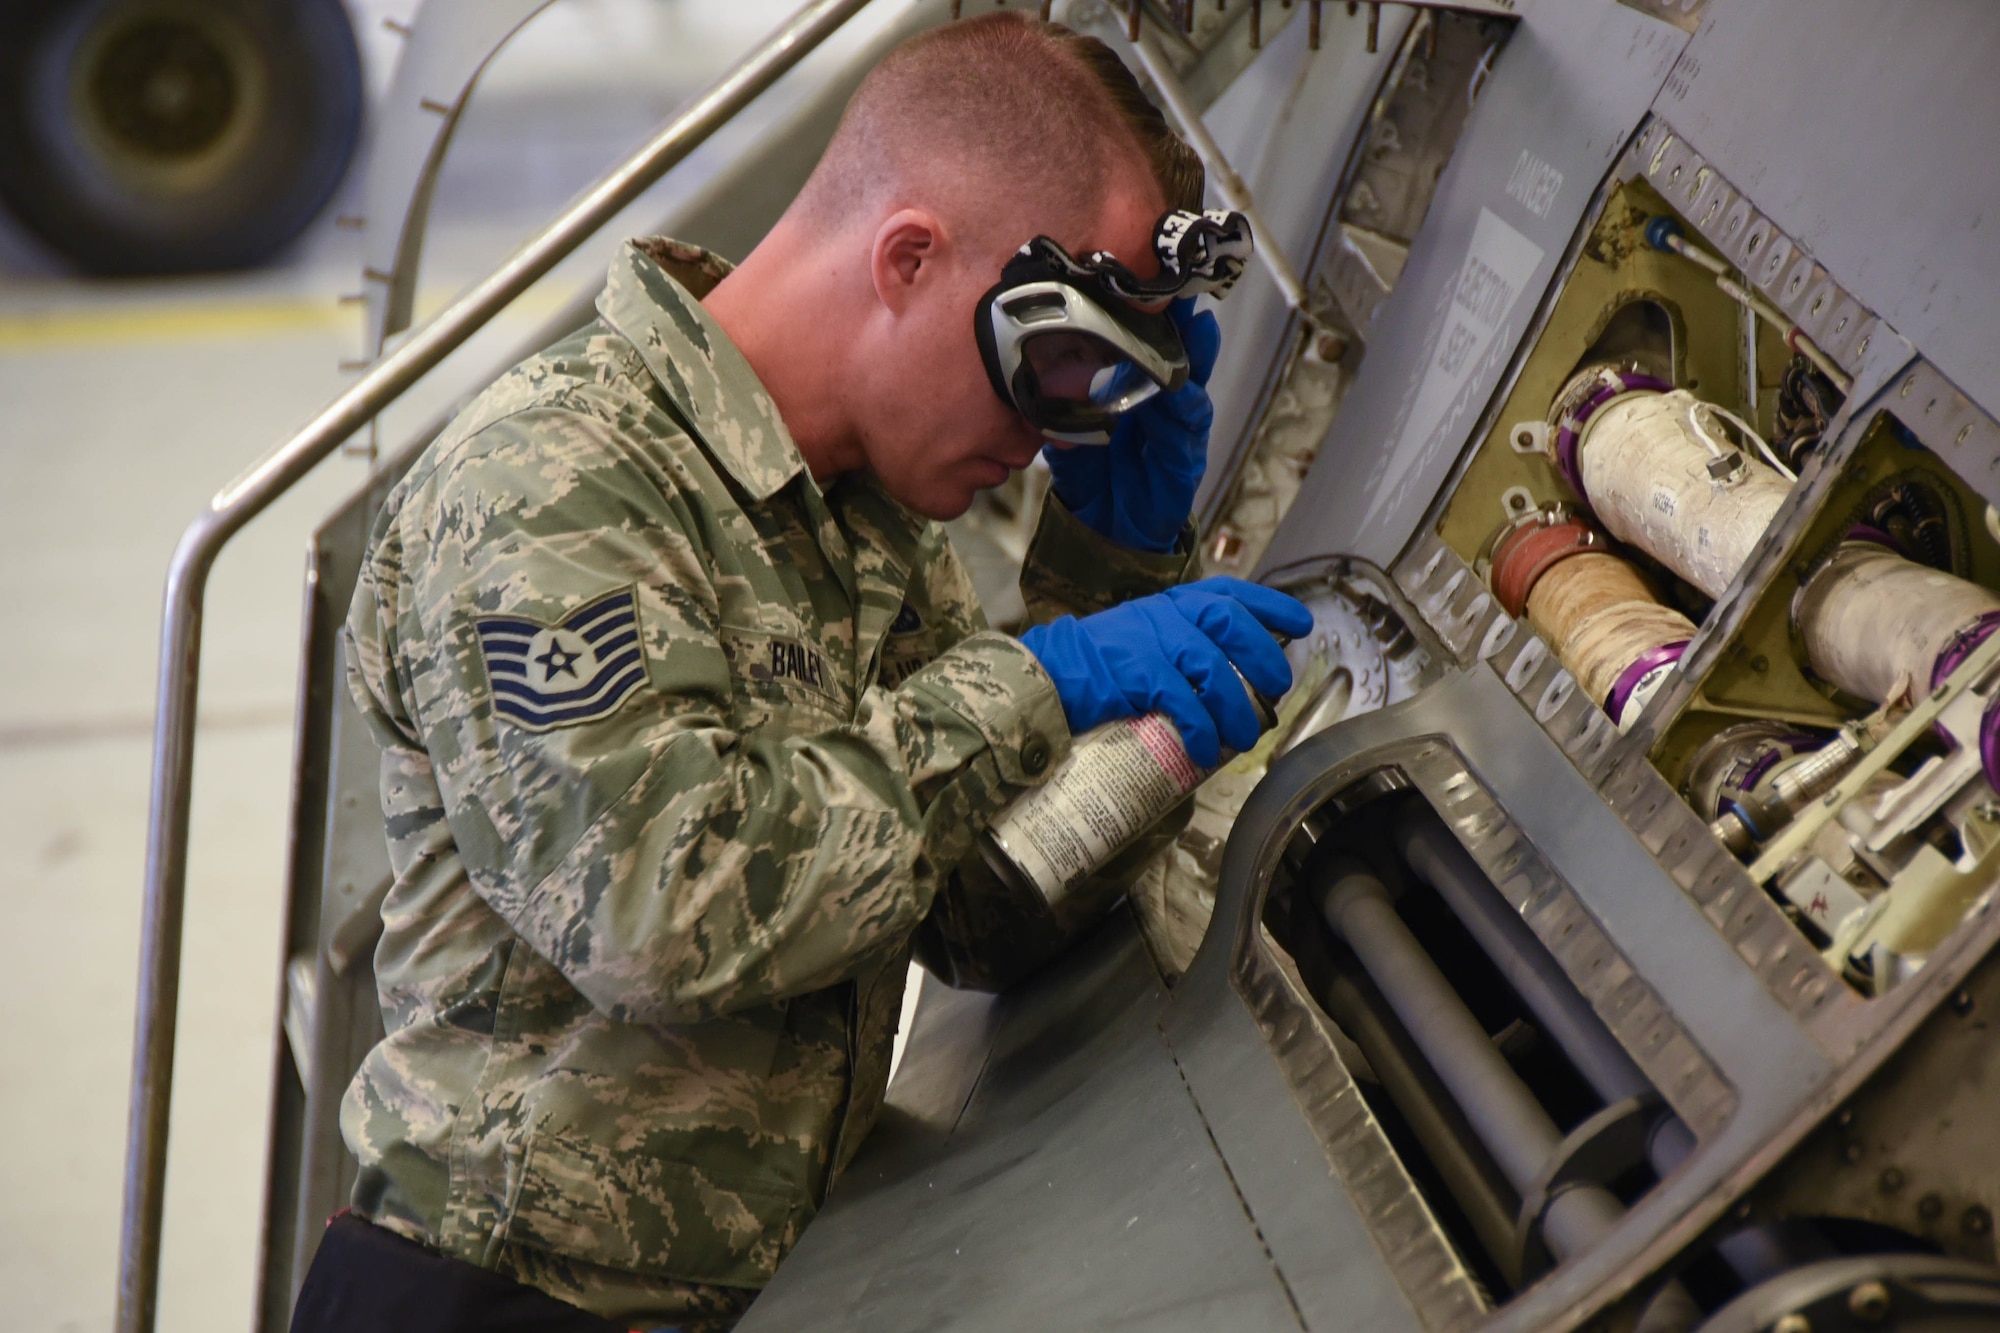 More than a dozen 926th maintainers performed their annual training working side-by-side 301st maintainers in Fort Worth to hone their aircraft maintenance skills and increase readiness.